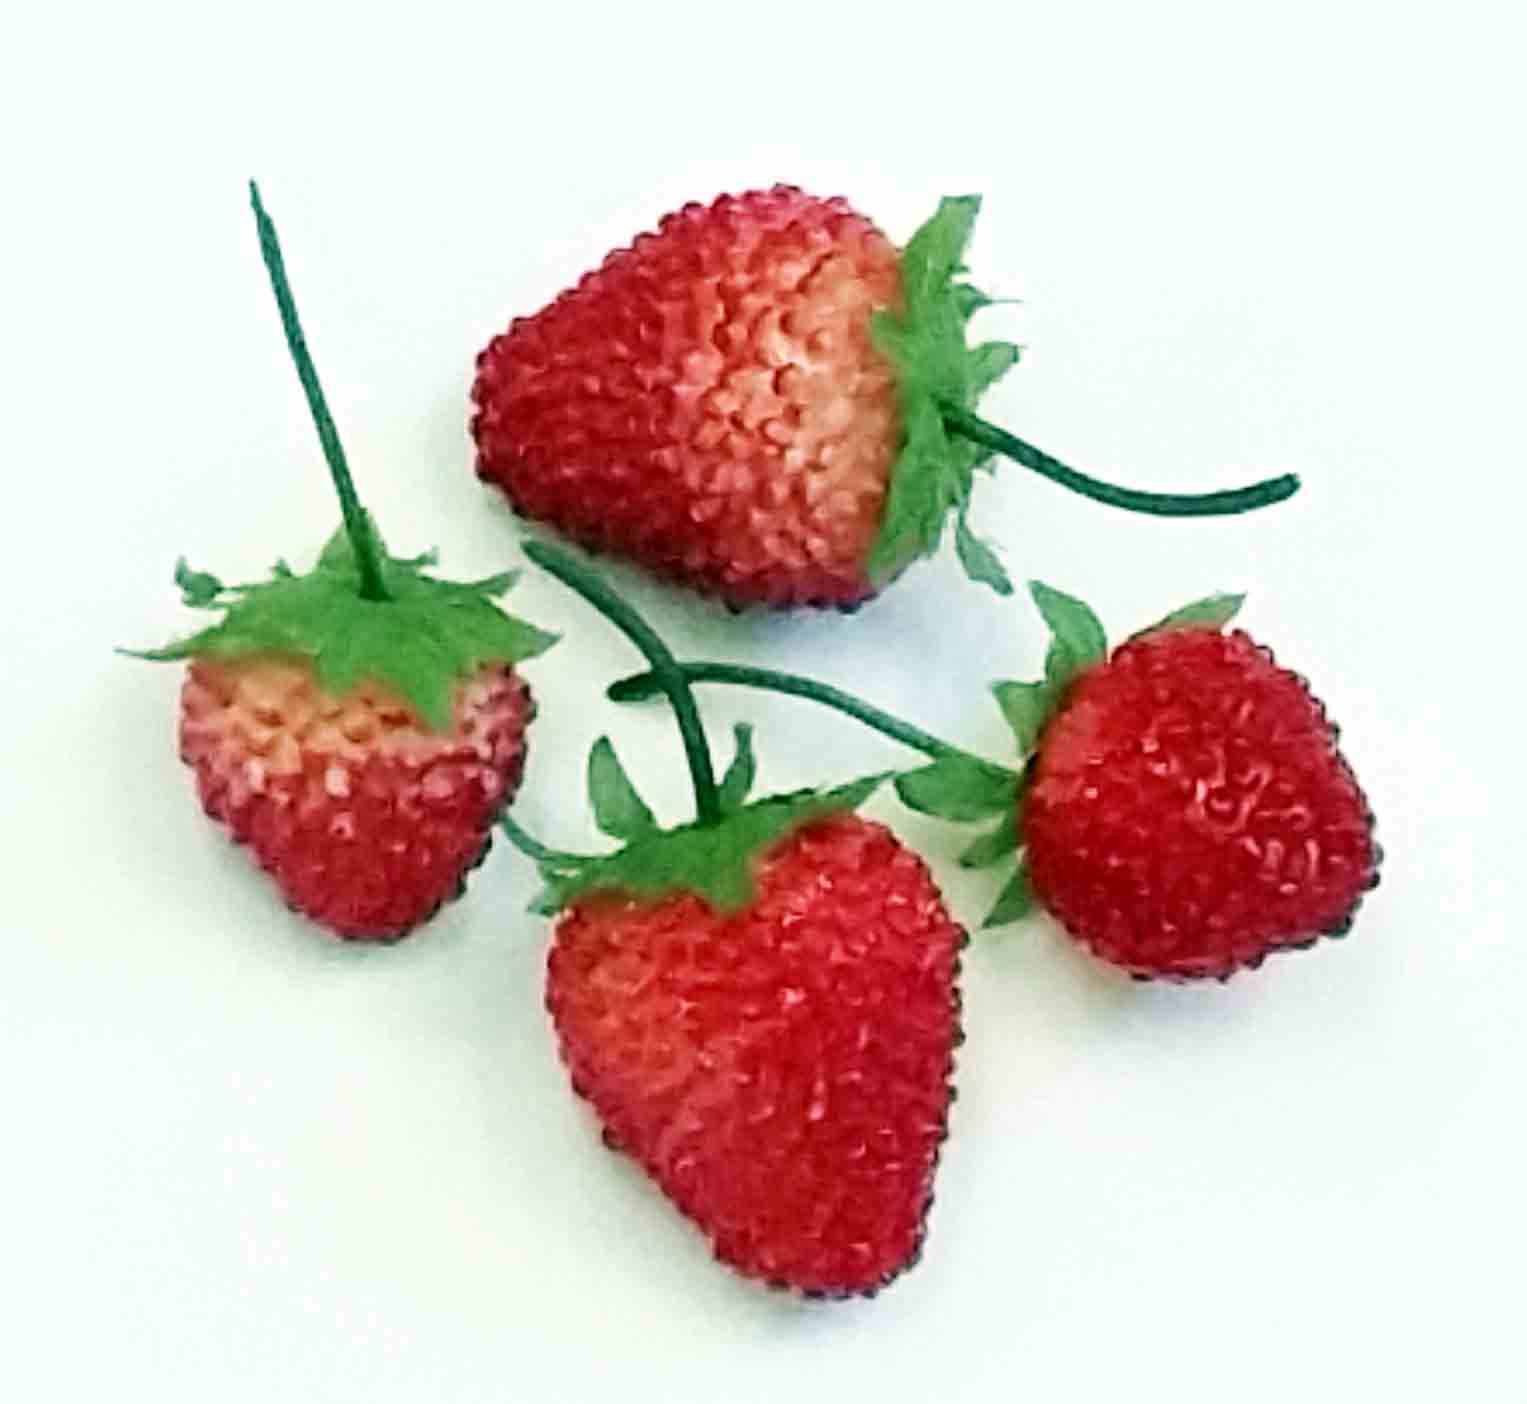 6405 - 1" to 1.5" Strawberries - 3.65 bag of 12